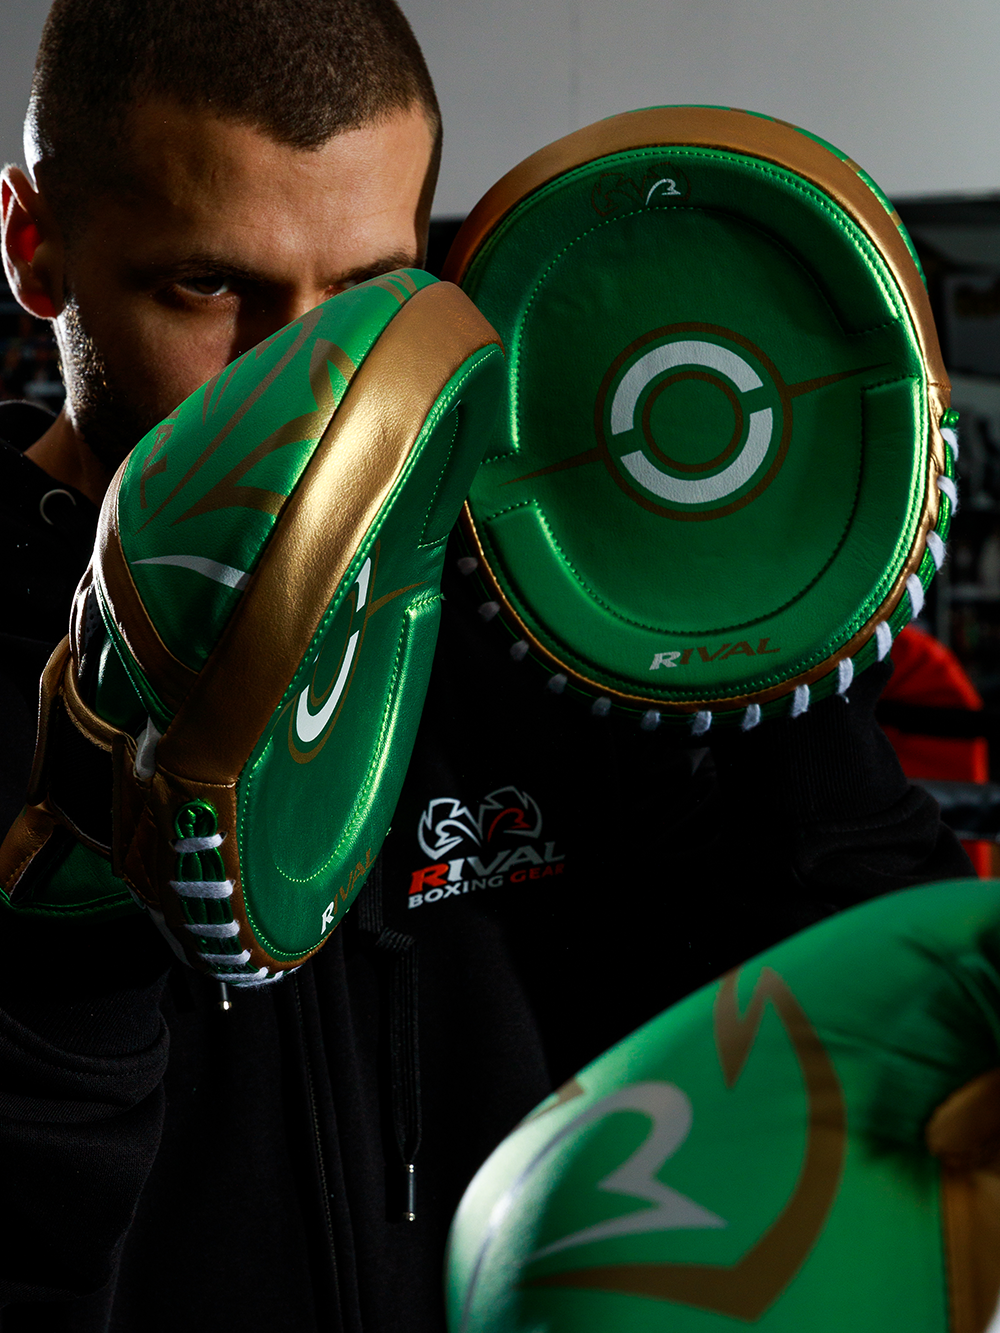 Rival 100 series boxing gear green